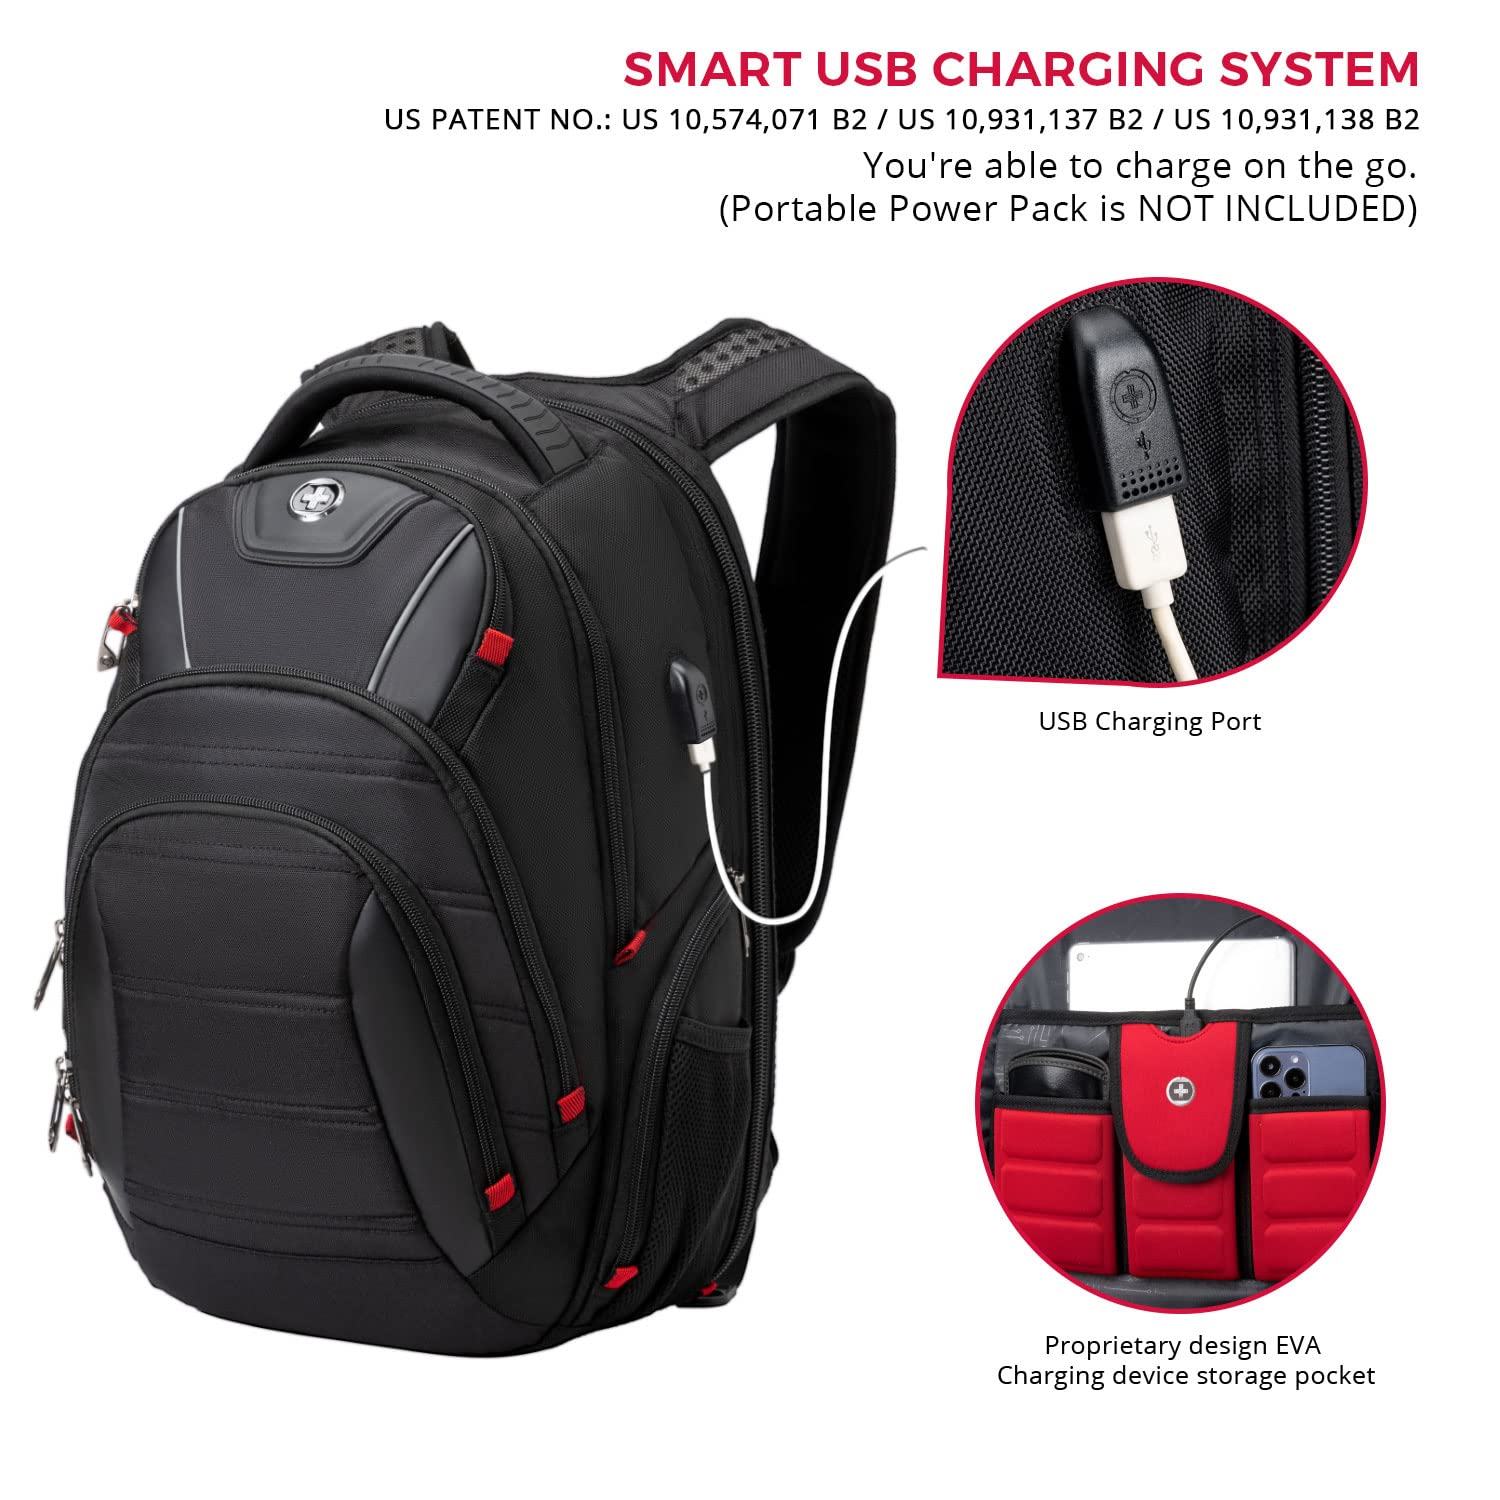 Swissdigital Design Circuit College Business Travel Backpack TSA Friendly Built in USB Charging RFID Protection Fits Laptops up to 15.6